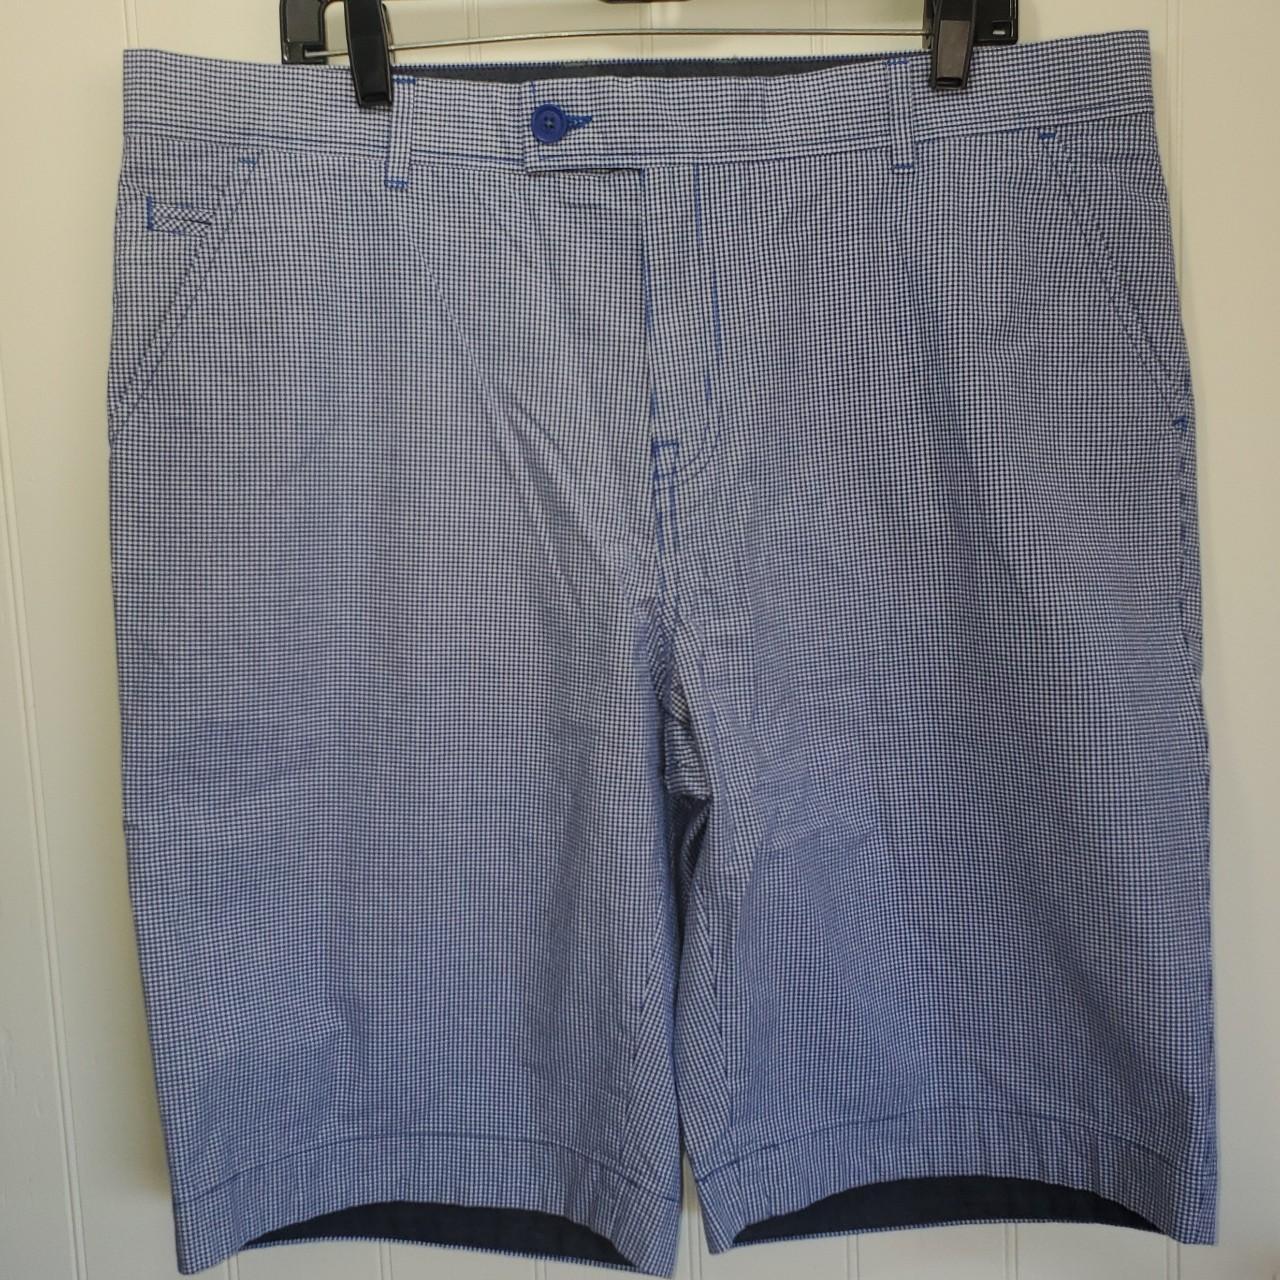 Ted Baker Men's Blue and White Shorts (2)